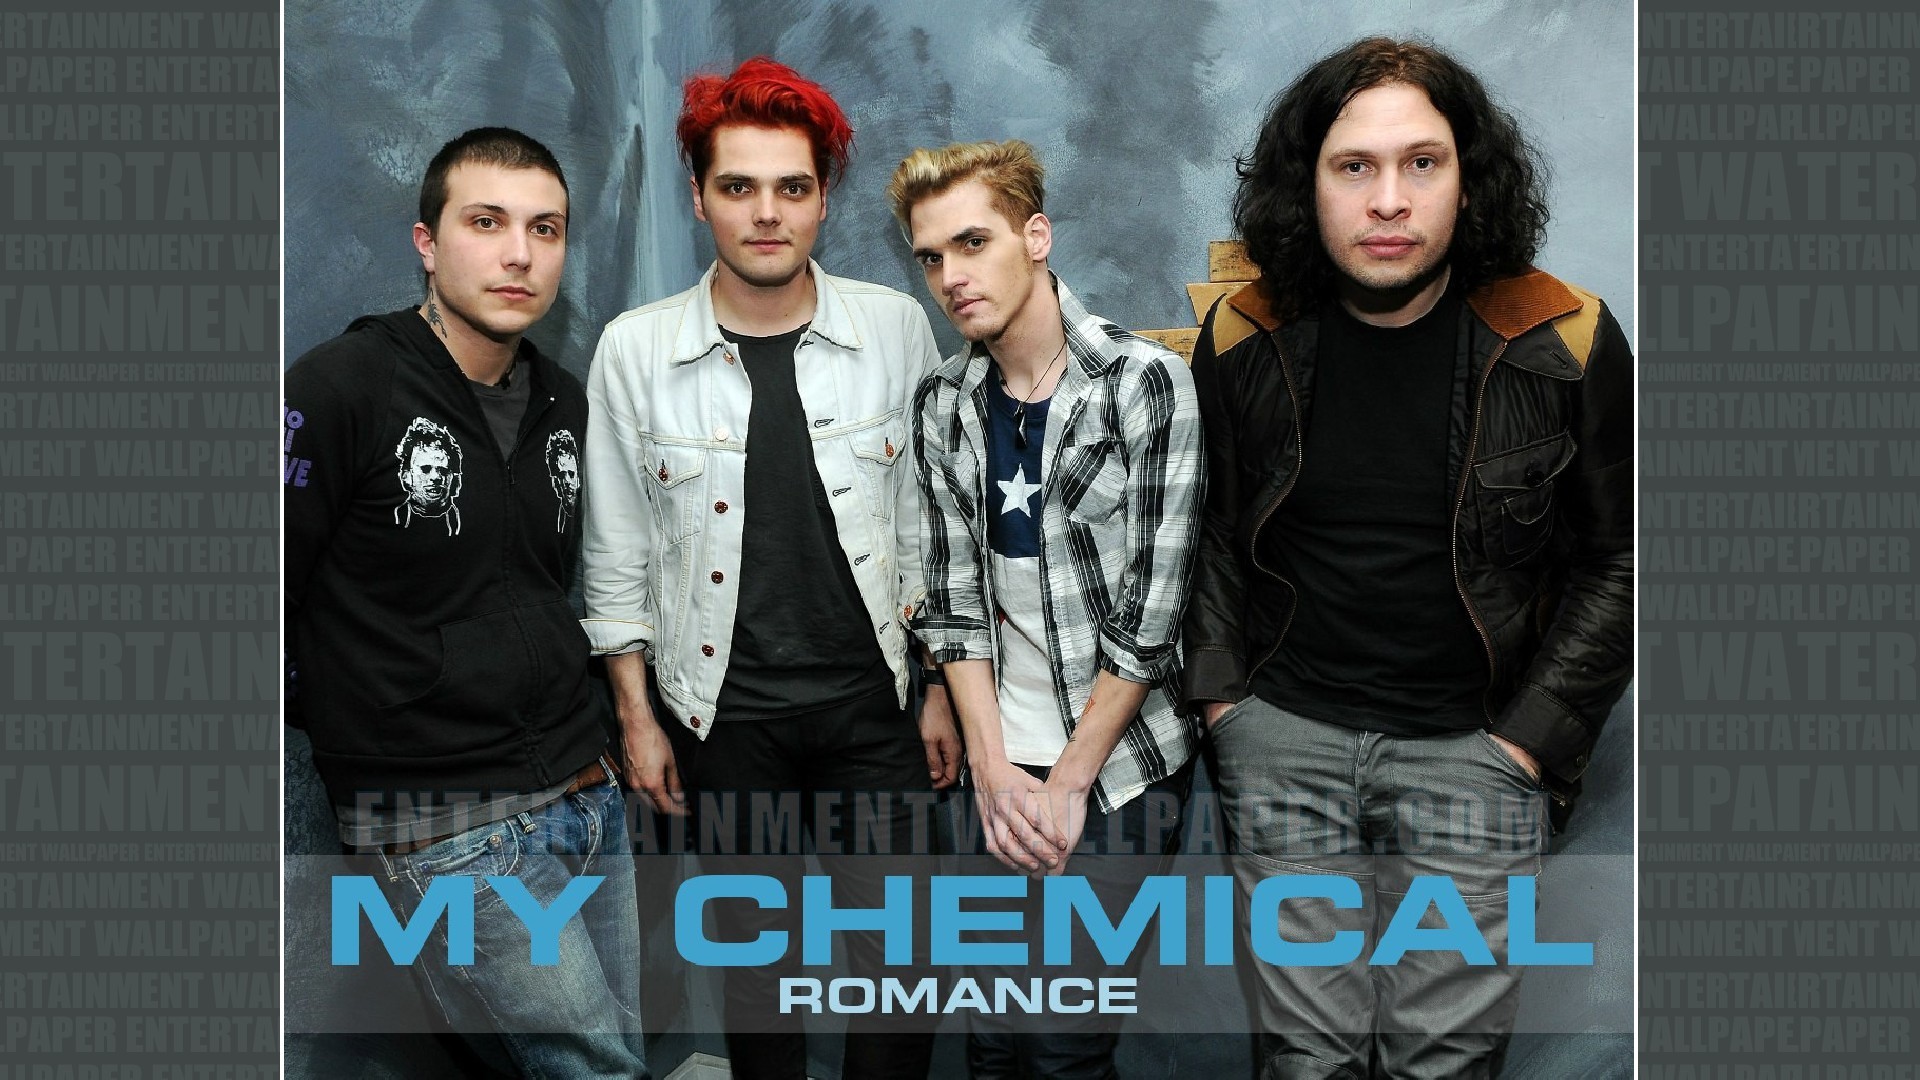 1920x1080 My Chemical Romance Wallpaper - Original size, download now.